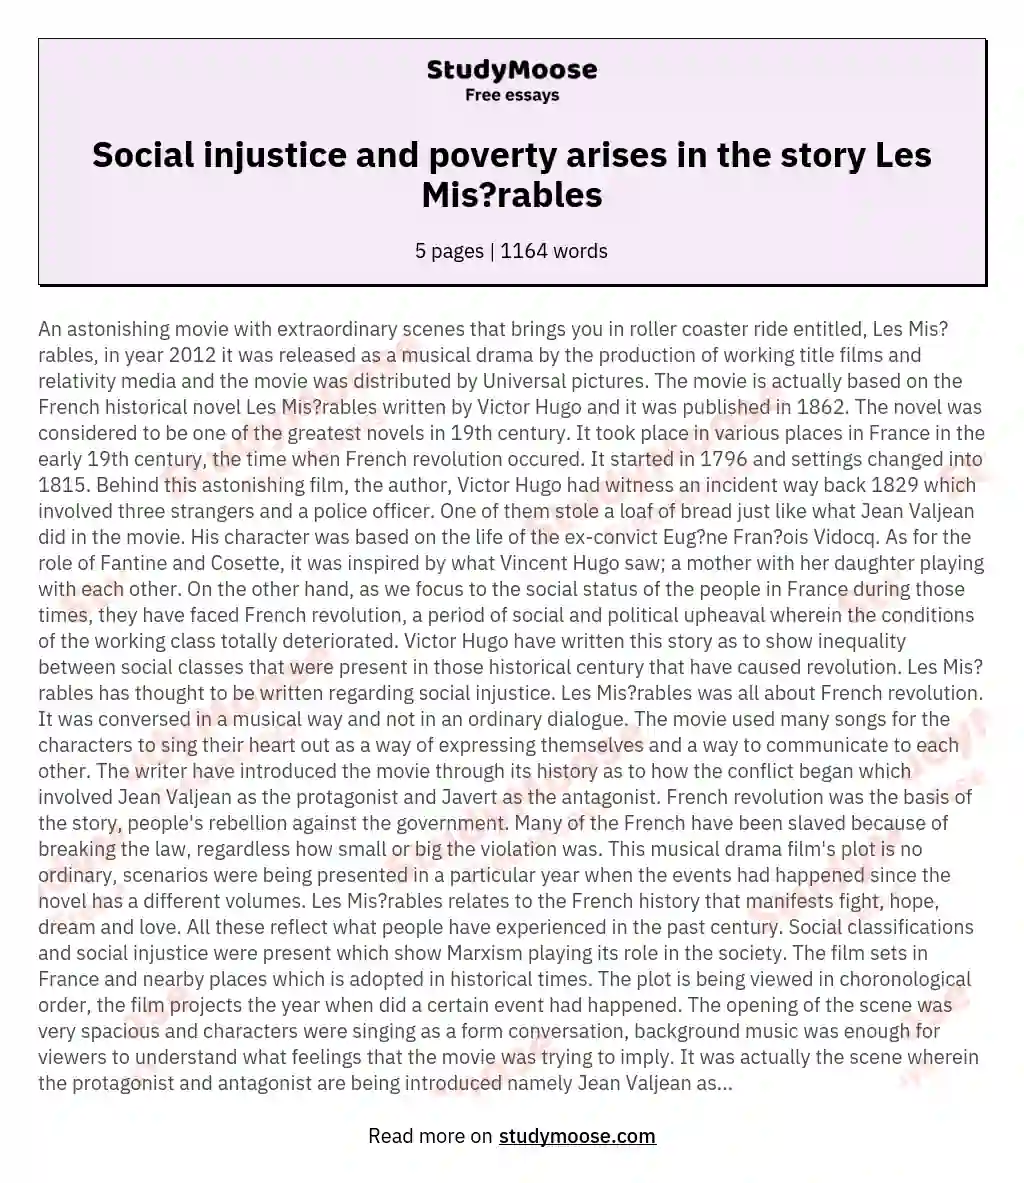 Social injustice and poverty arises in the story Les Mis?rables